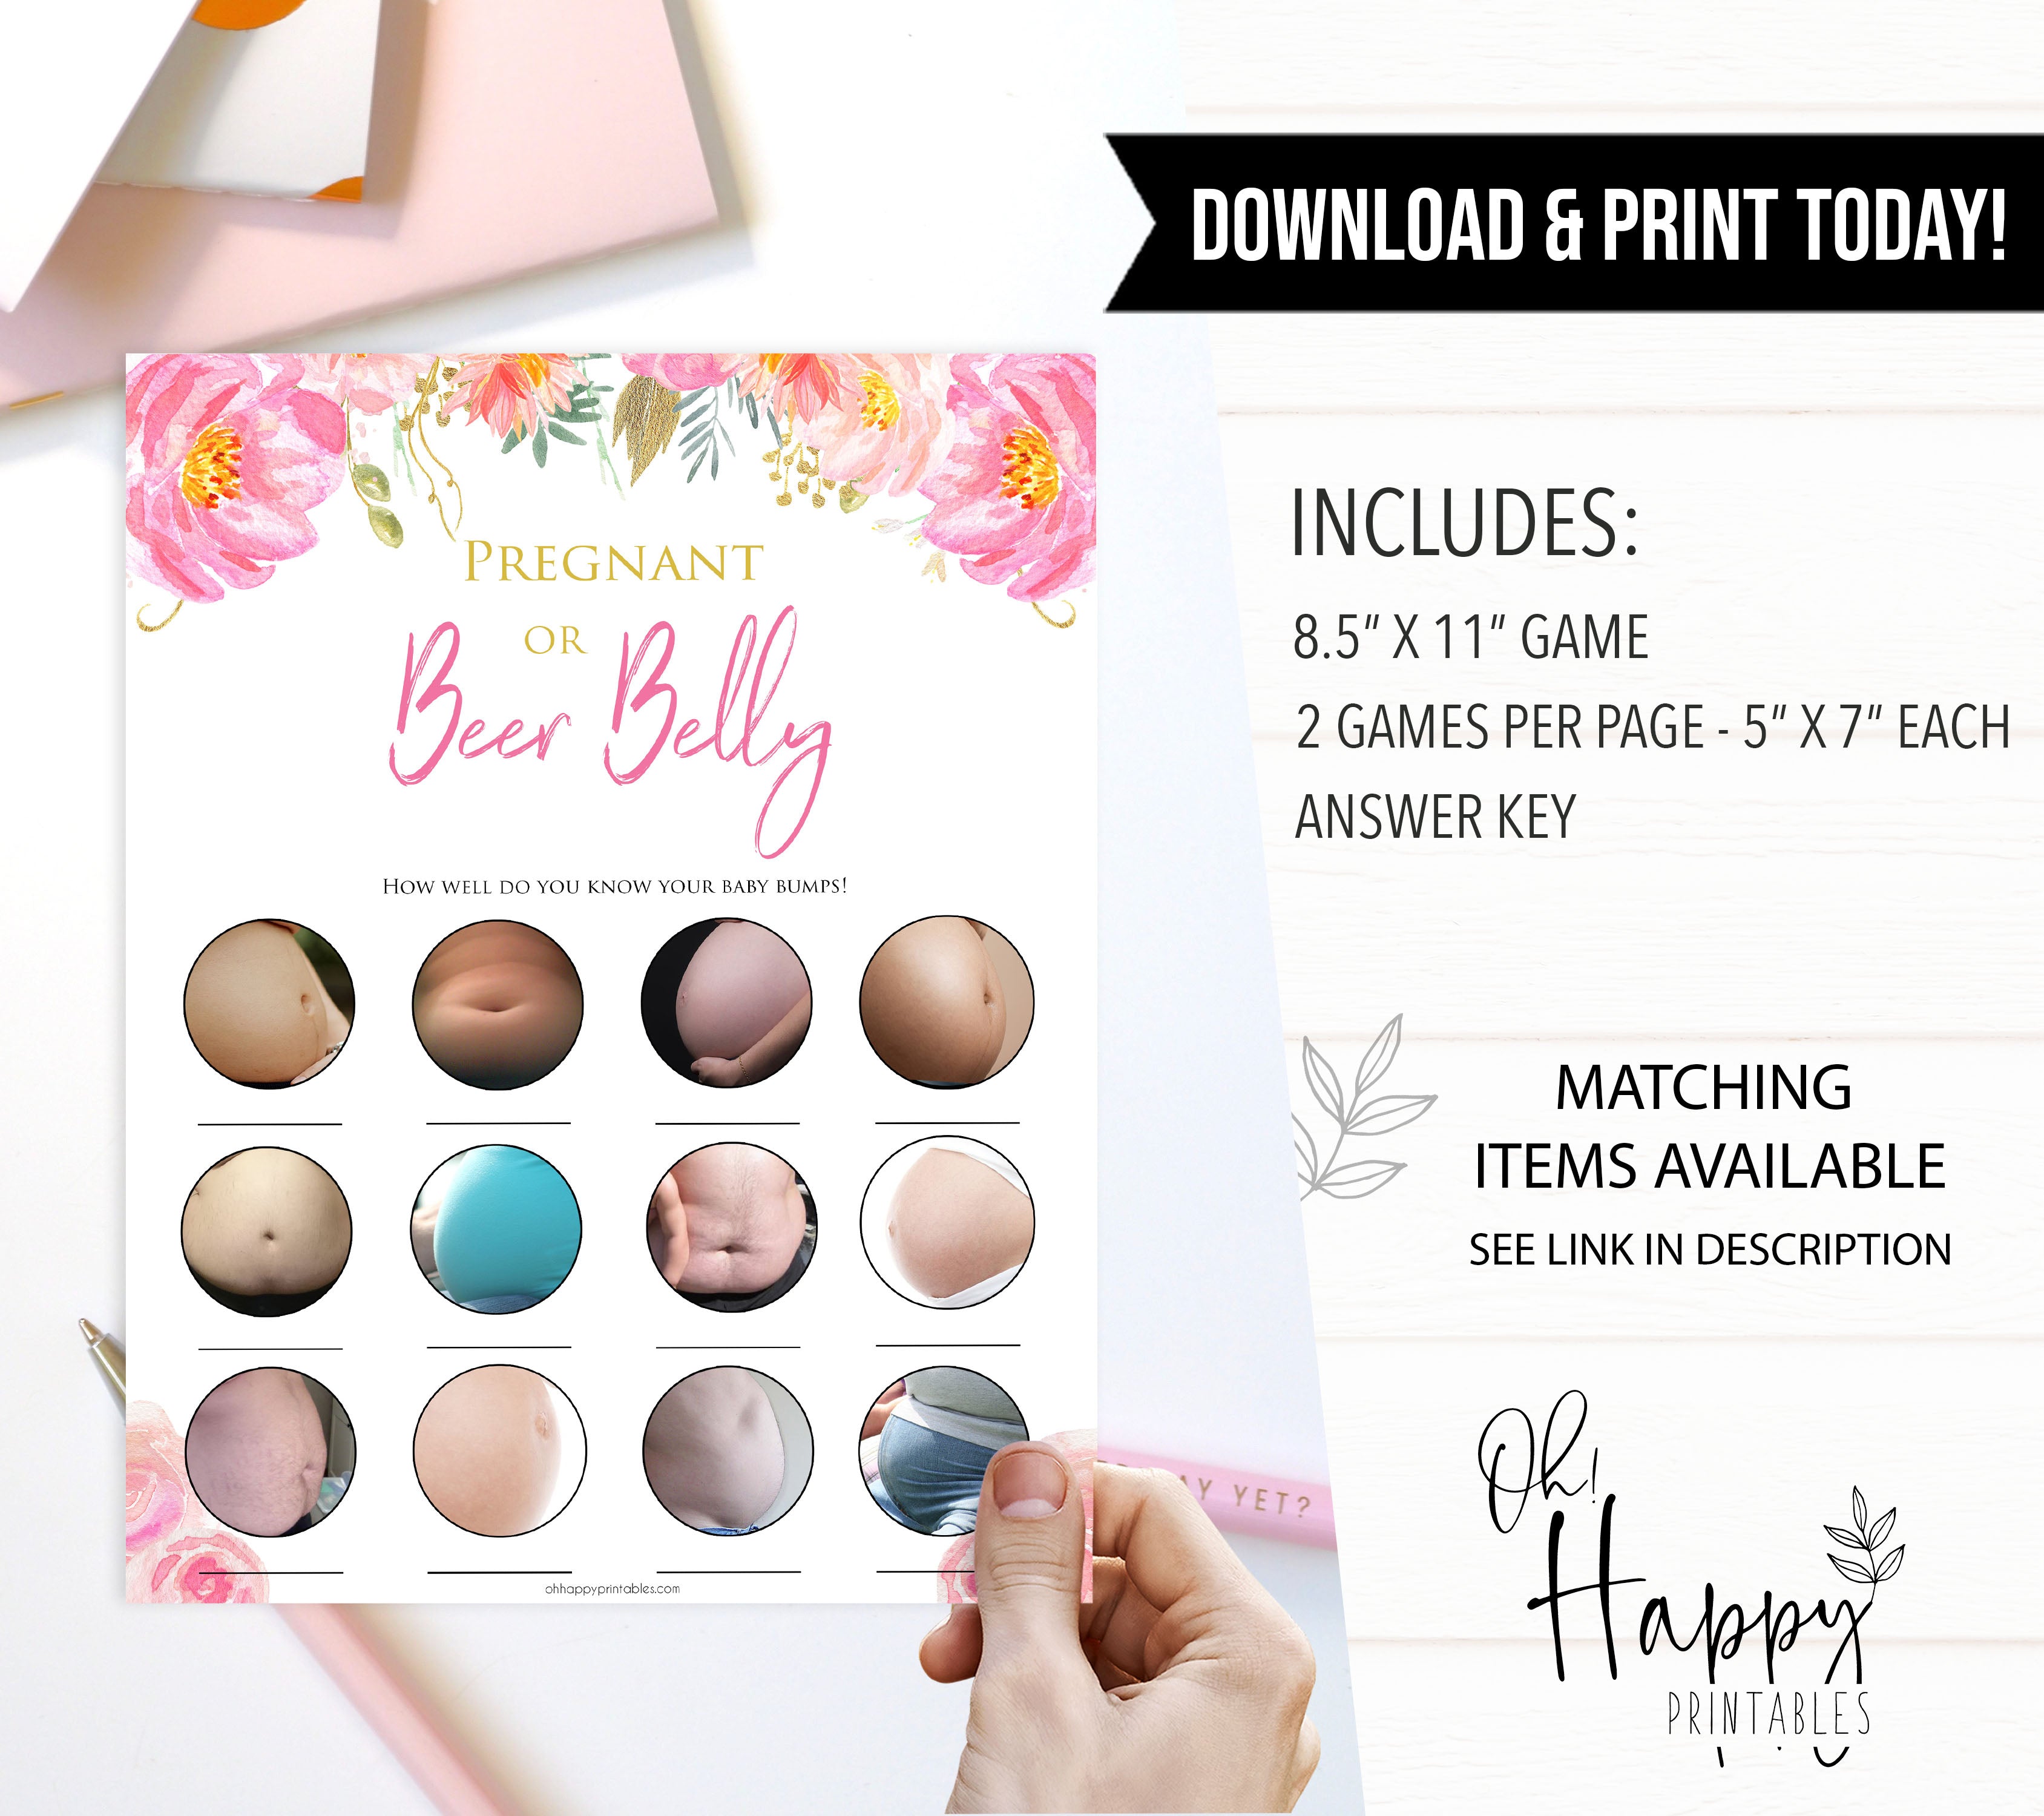 Pink blush floral baby shower pregnant or beer belly game, printable baby games, baby shower games, blush baby shower, floral baby games, girl baby shower ideas, pink baby shower ideas, floral baby games, popular baby games, fun baby games